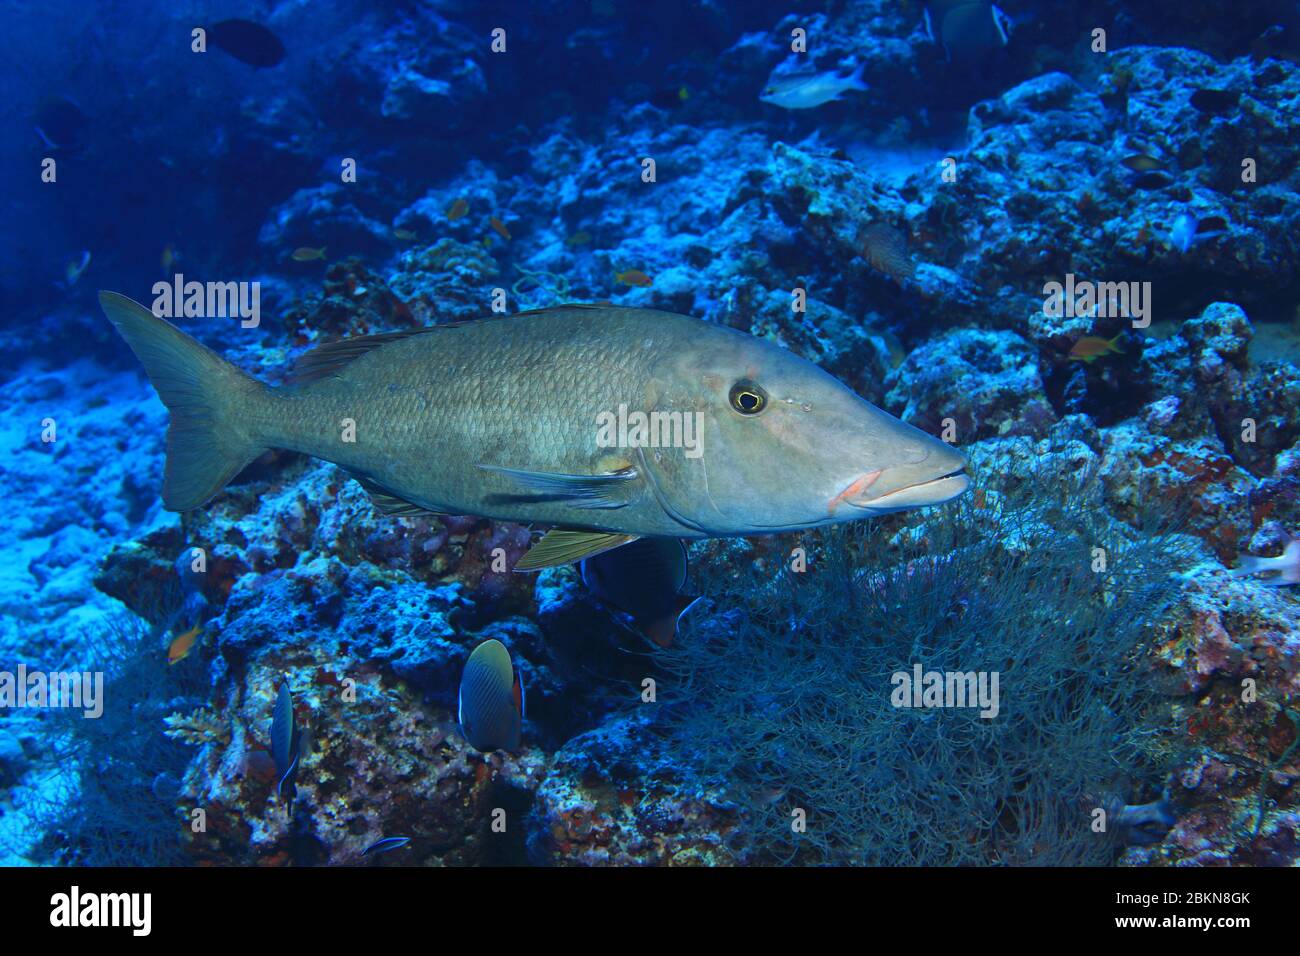 Longface emperor fish (Lethrinus olivaceus) underwater in the coral reef of the Indian Ocean Stock Photo